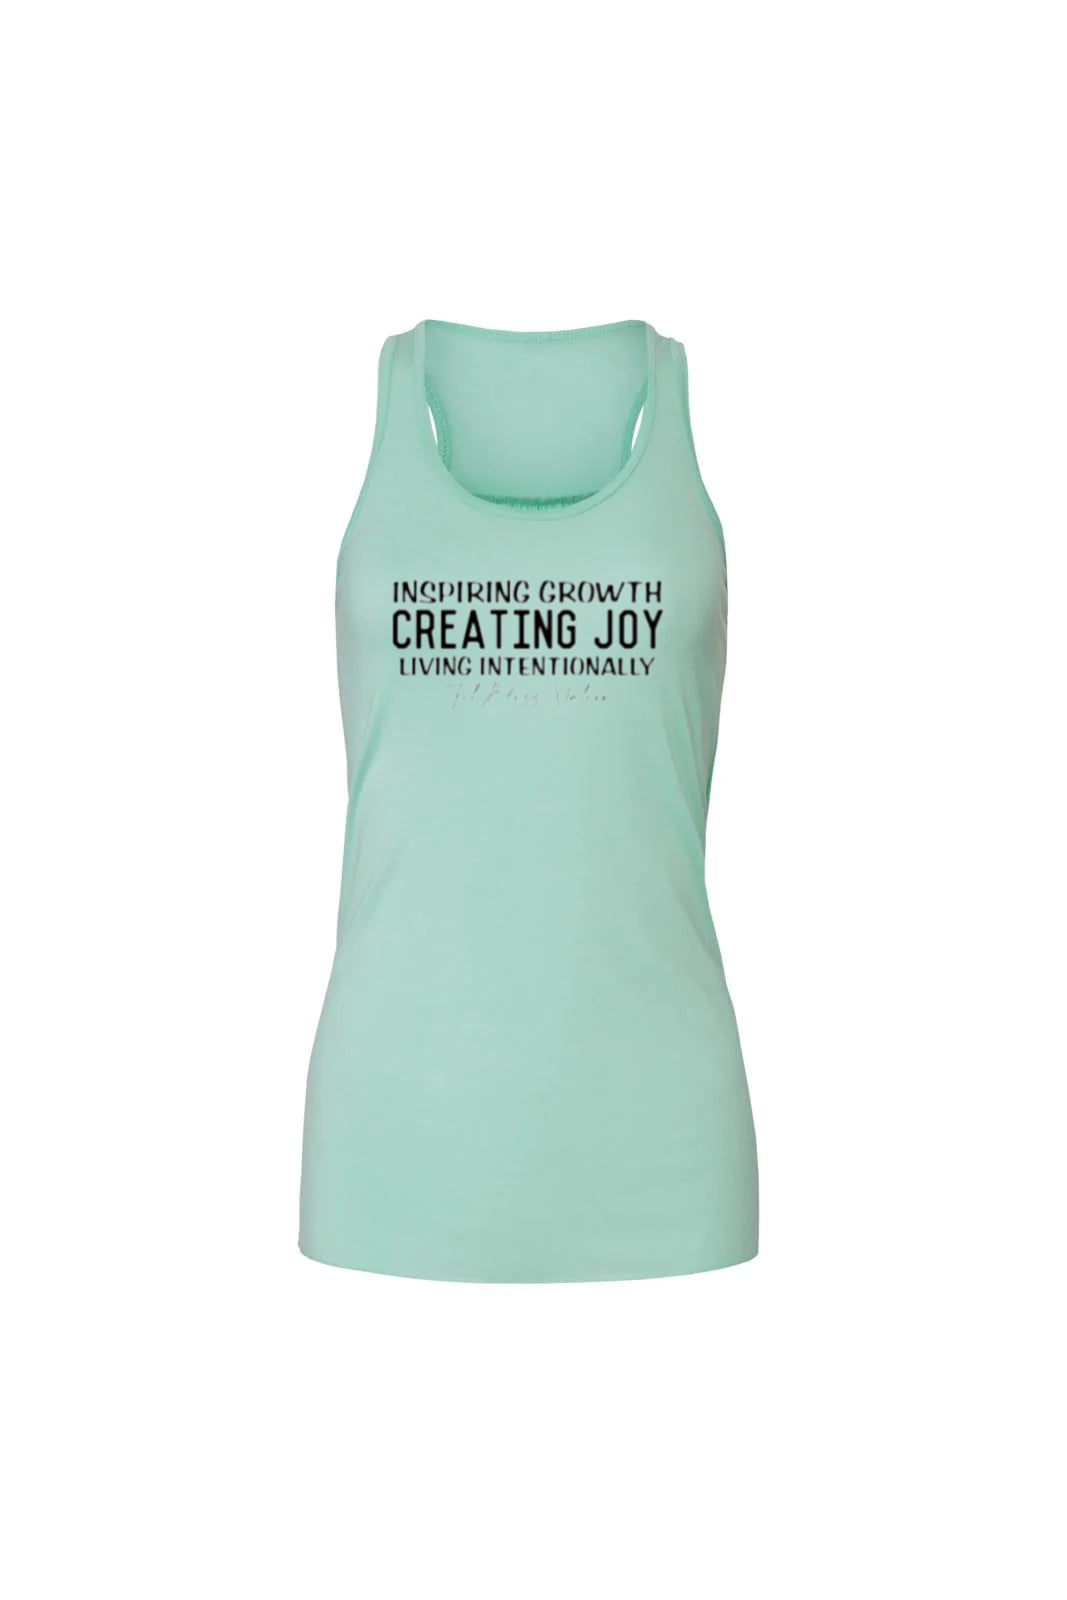 FIT BLISS NATION QUOTE TANK